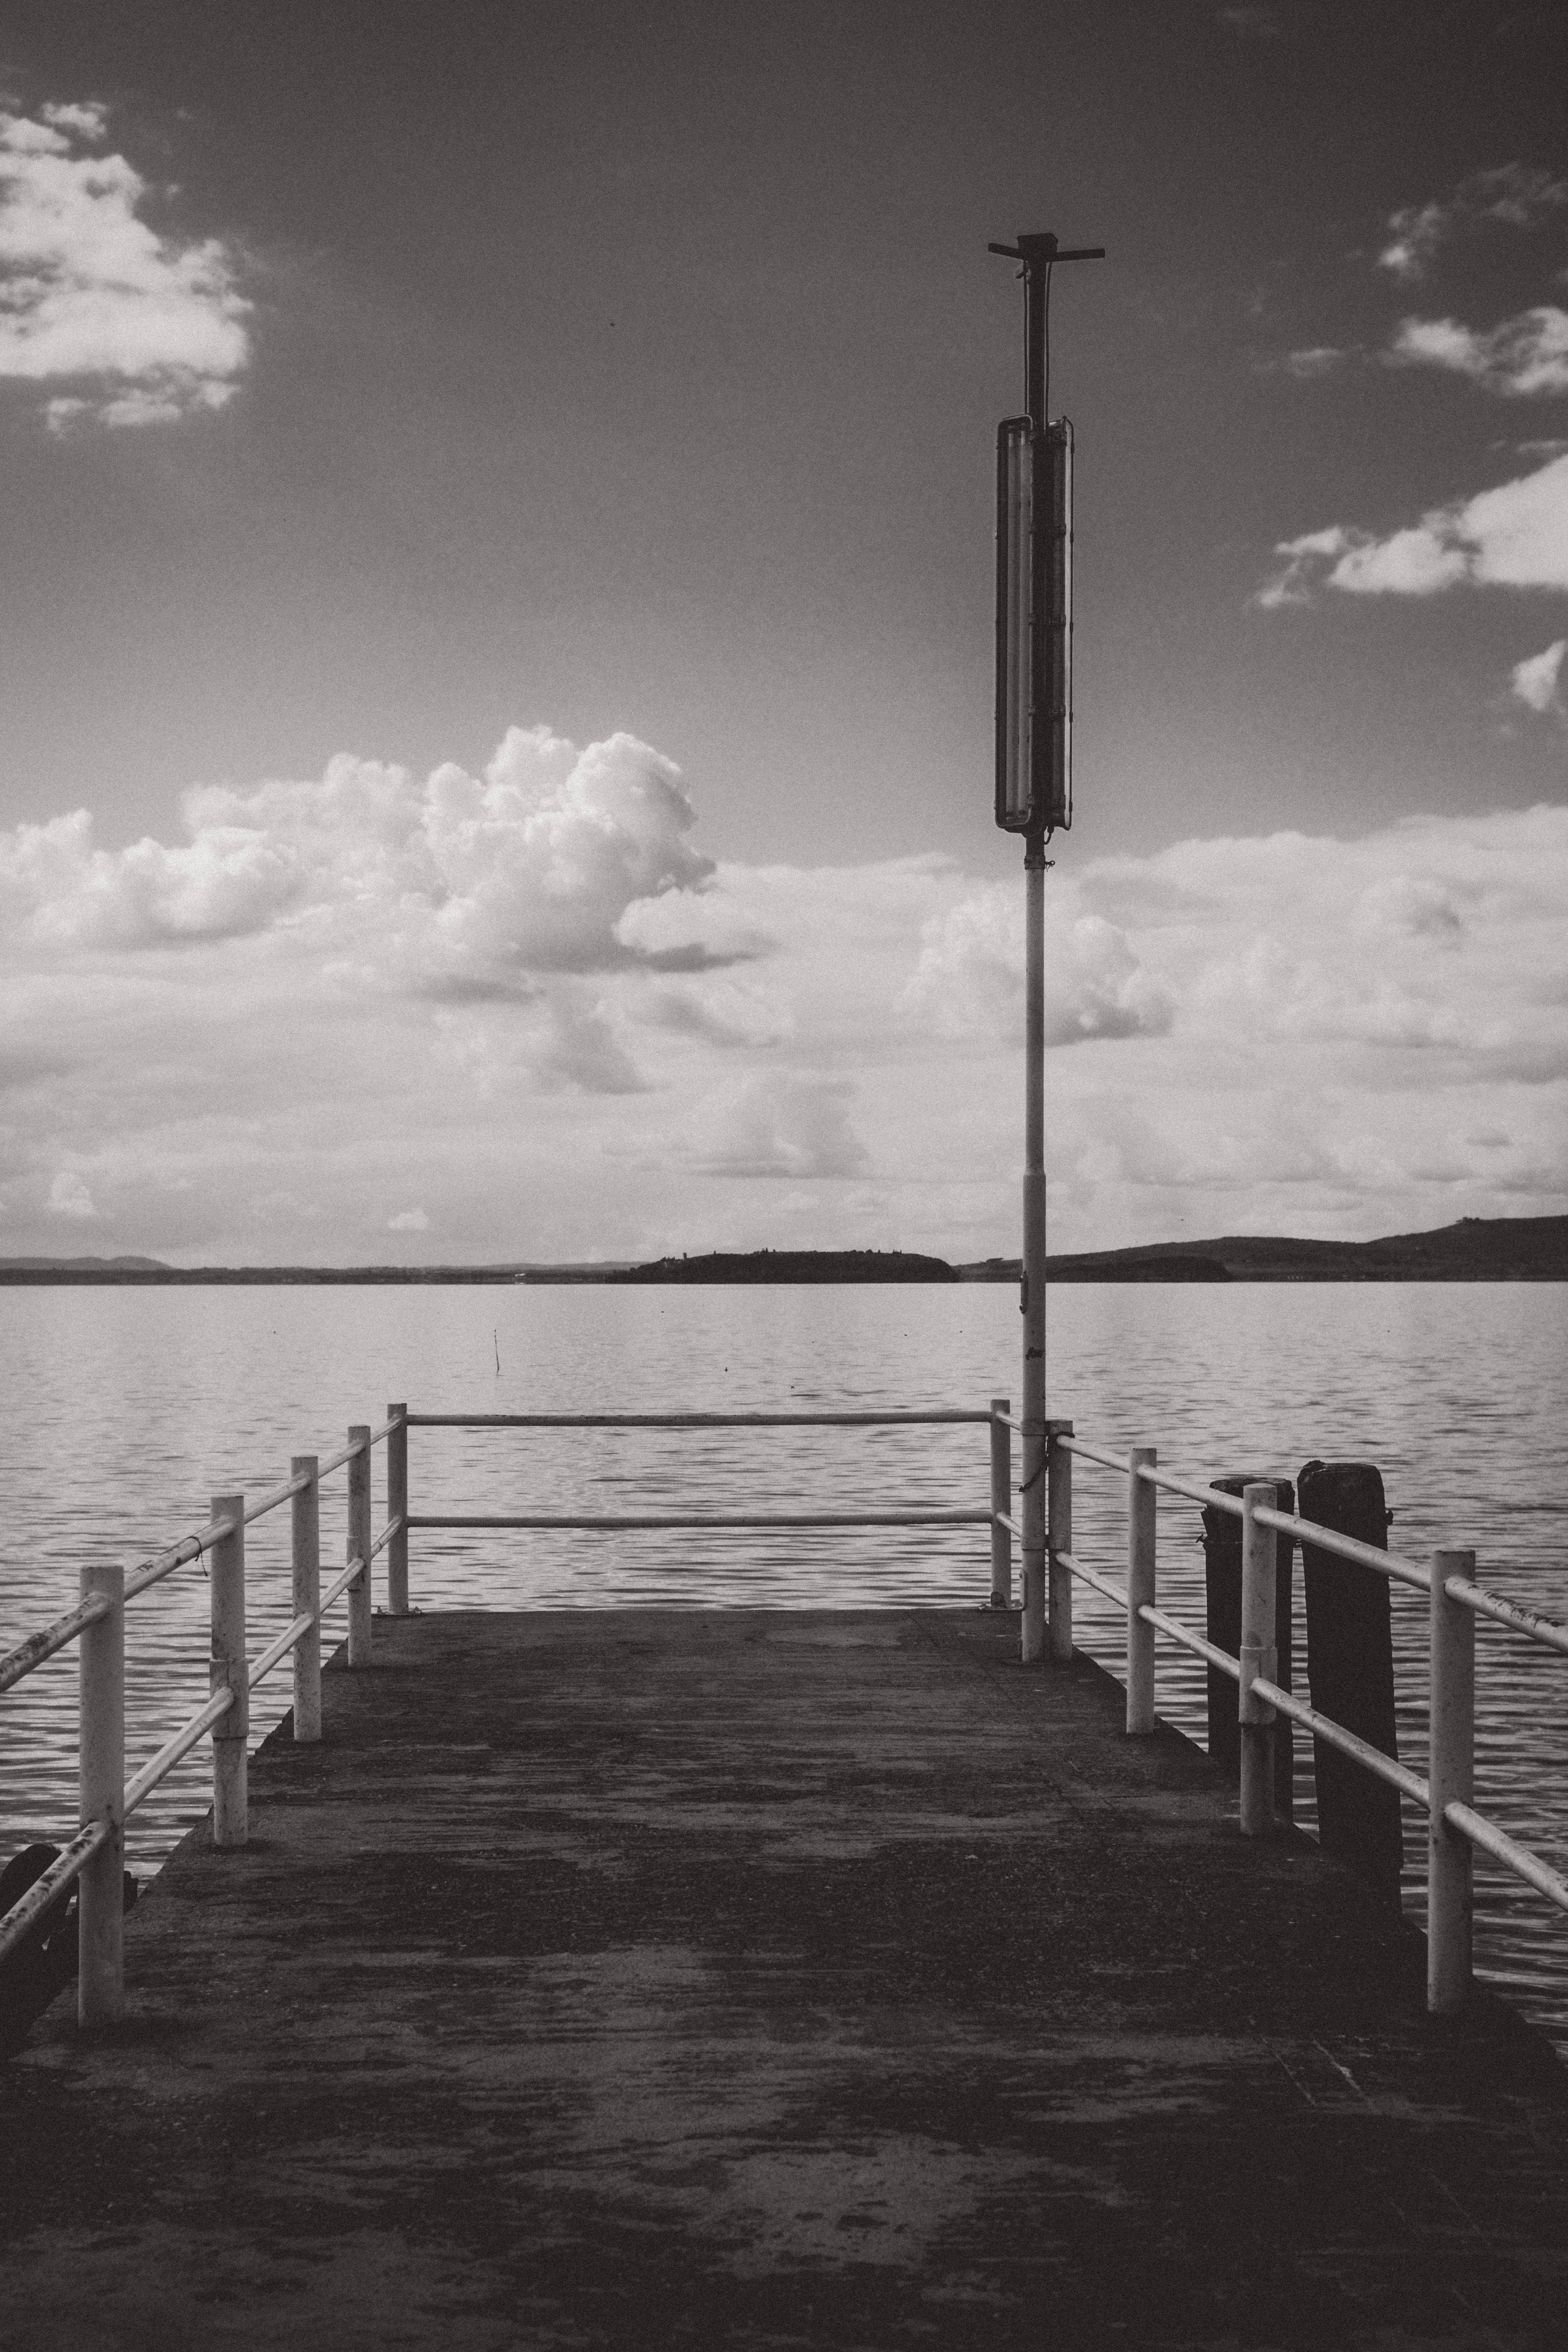 A Pier in Tuscany - Notice the Space